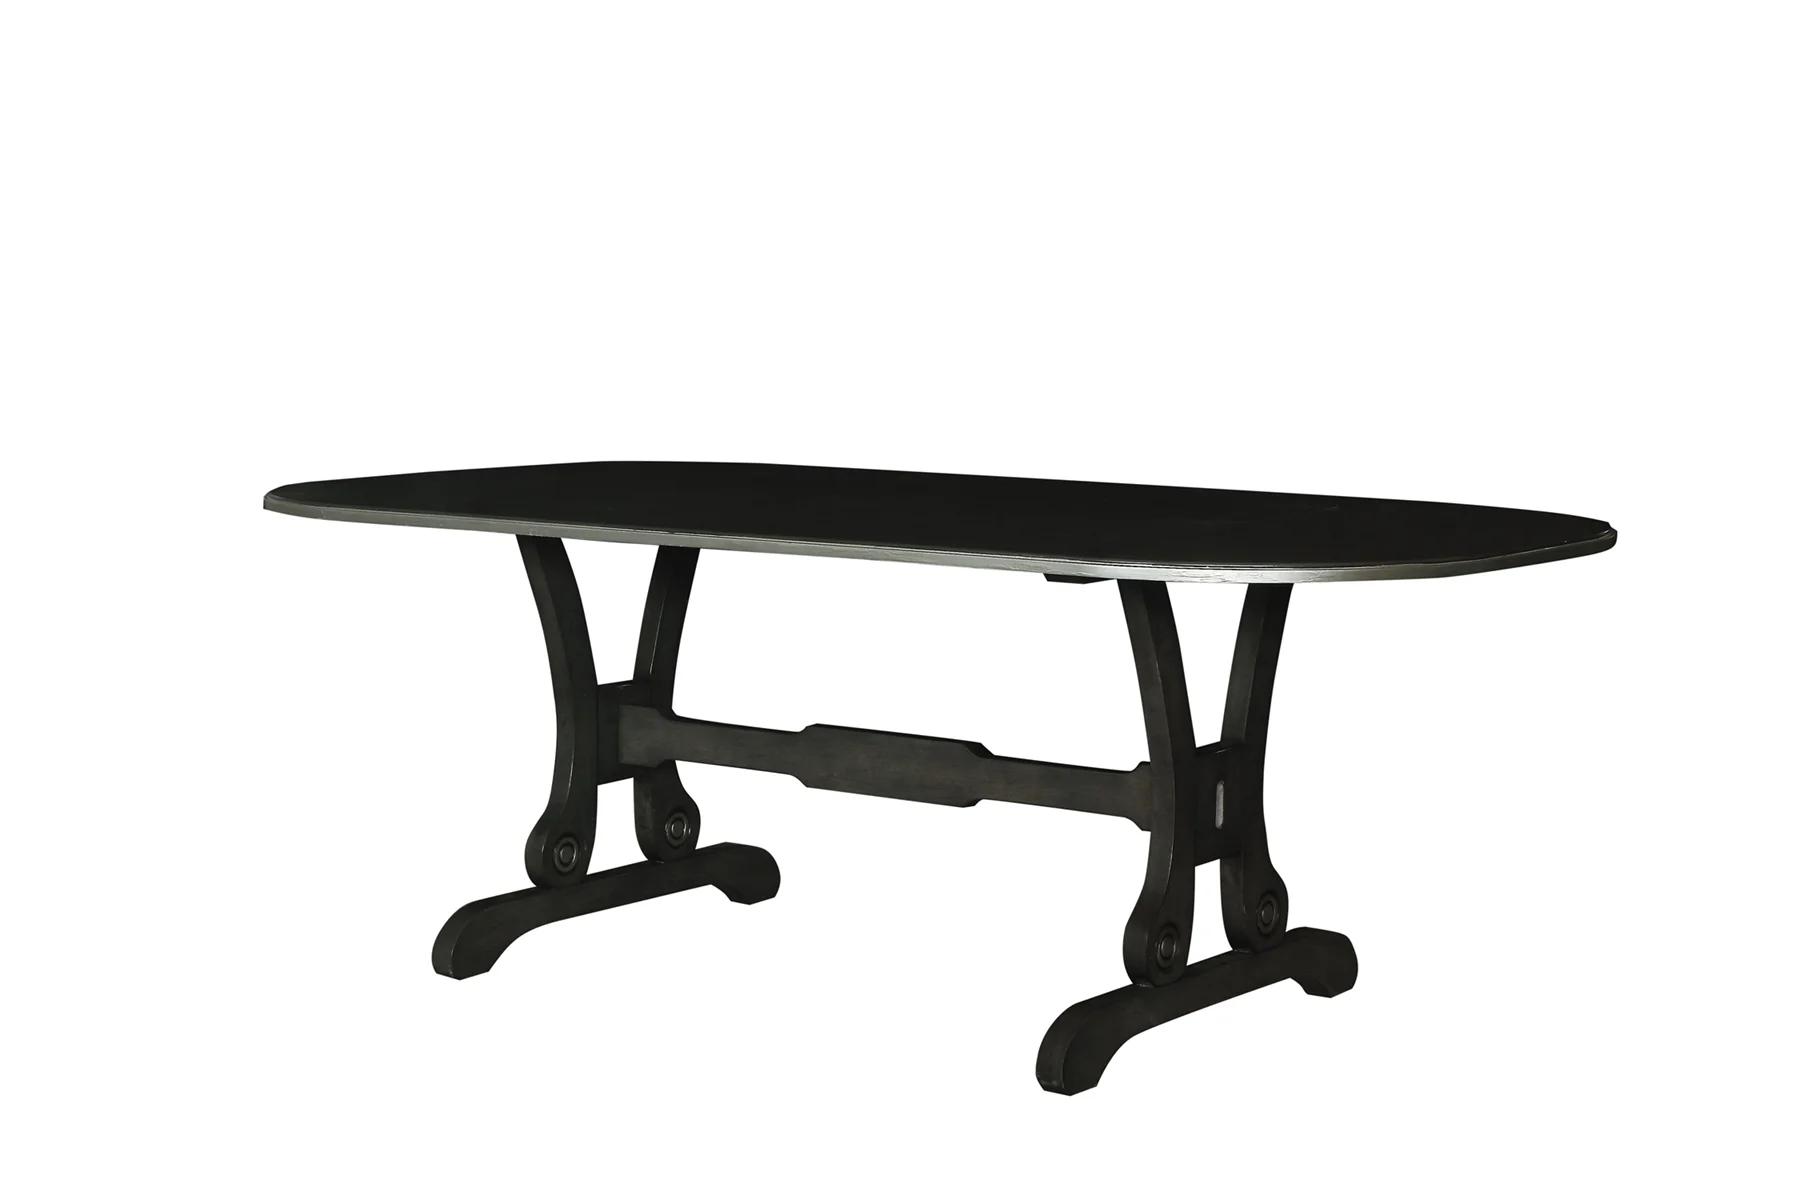 Transitional Dining Table House Beatrice 68810 in Charcoal 